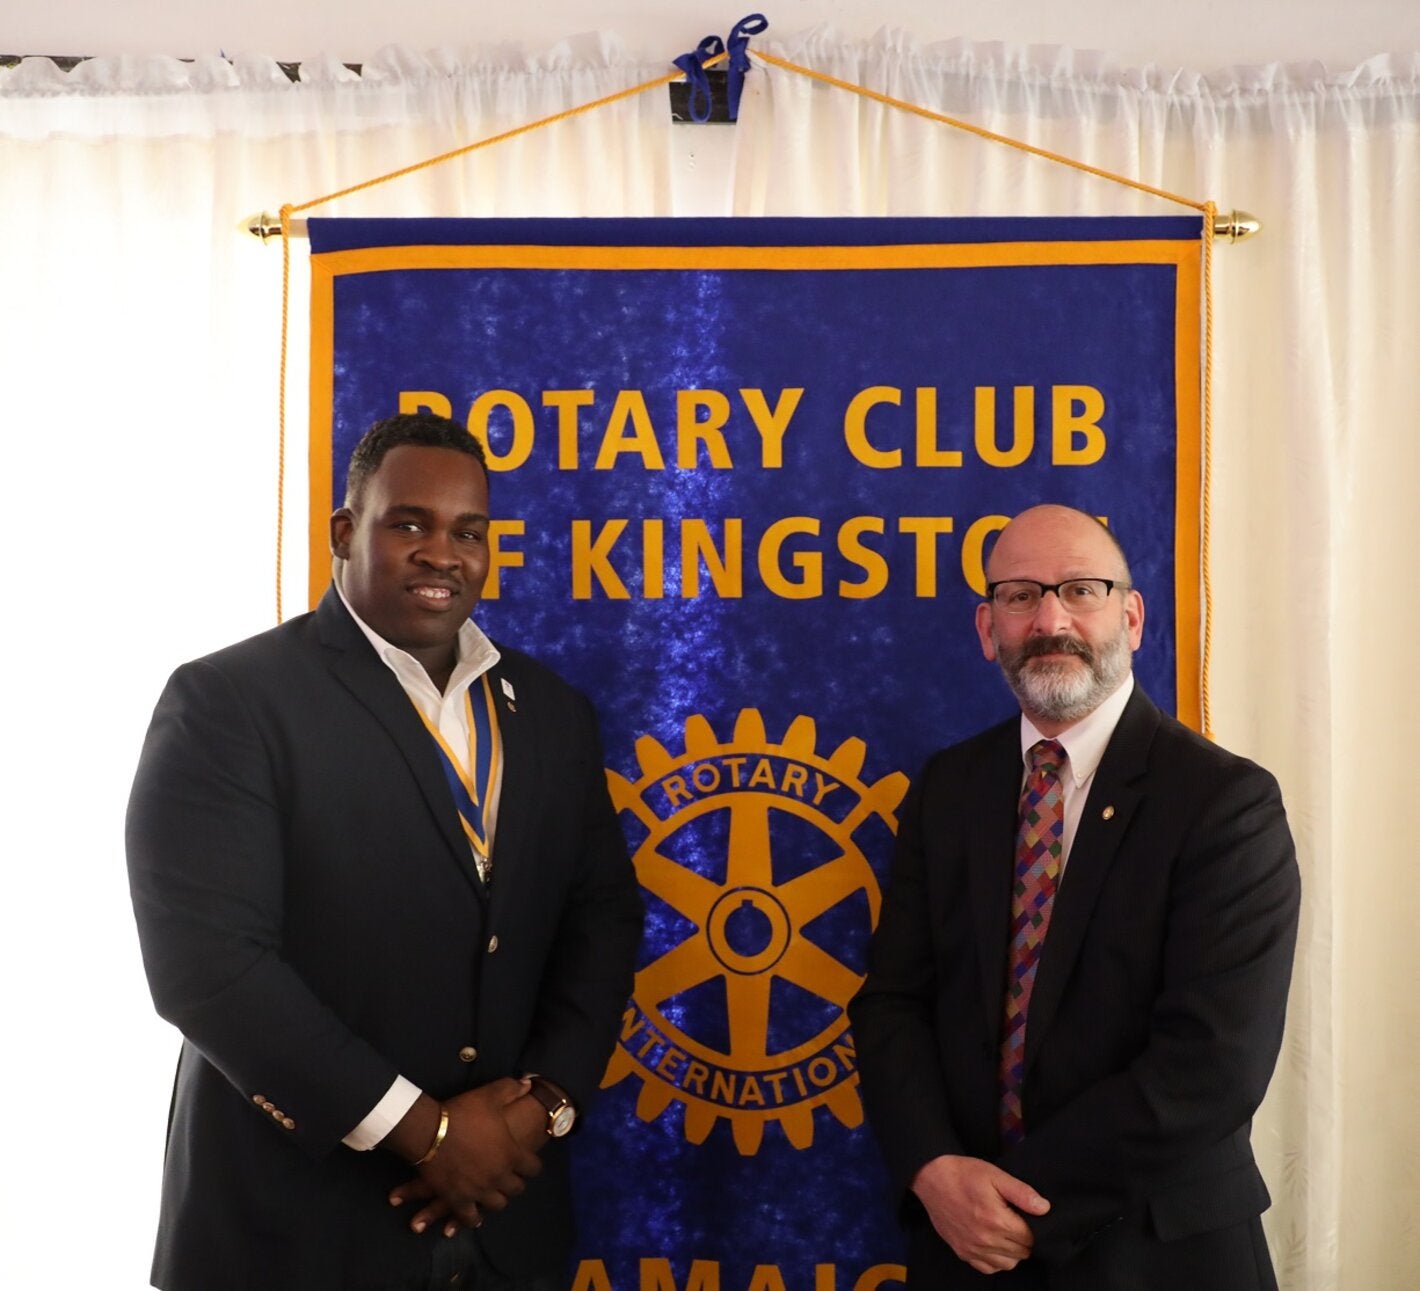 Mr. Ian Stein, Pan American Health Organization/ World Health Organization Representative to Jamaica, Bermuda and the Cayman Islands (right) paused to greet Karsten Johnson, President of the Rotary Club of Kingston after his lunchtime presentation on polio and NCDs